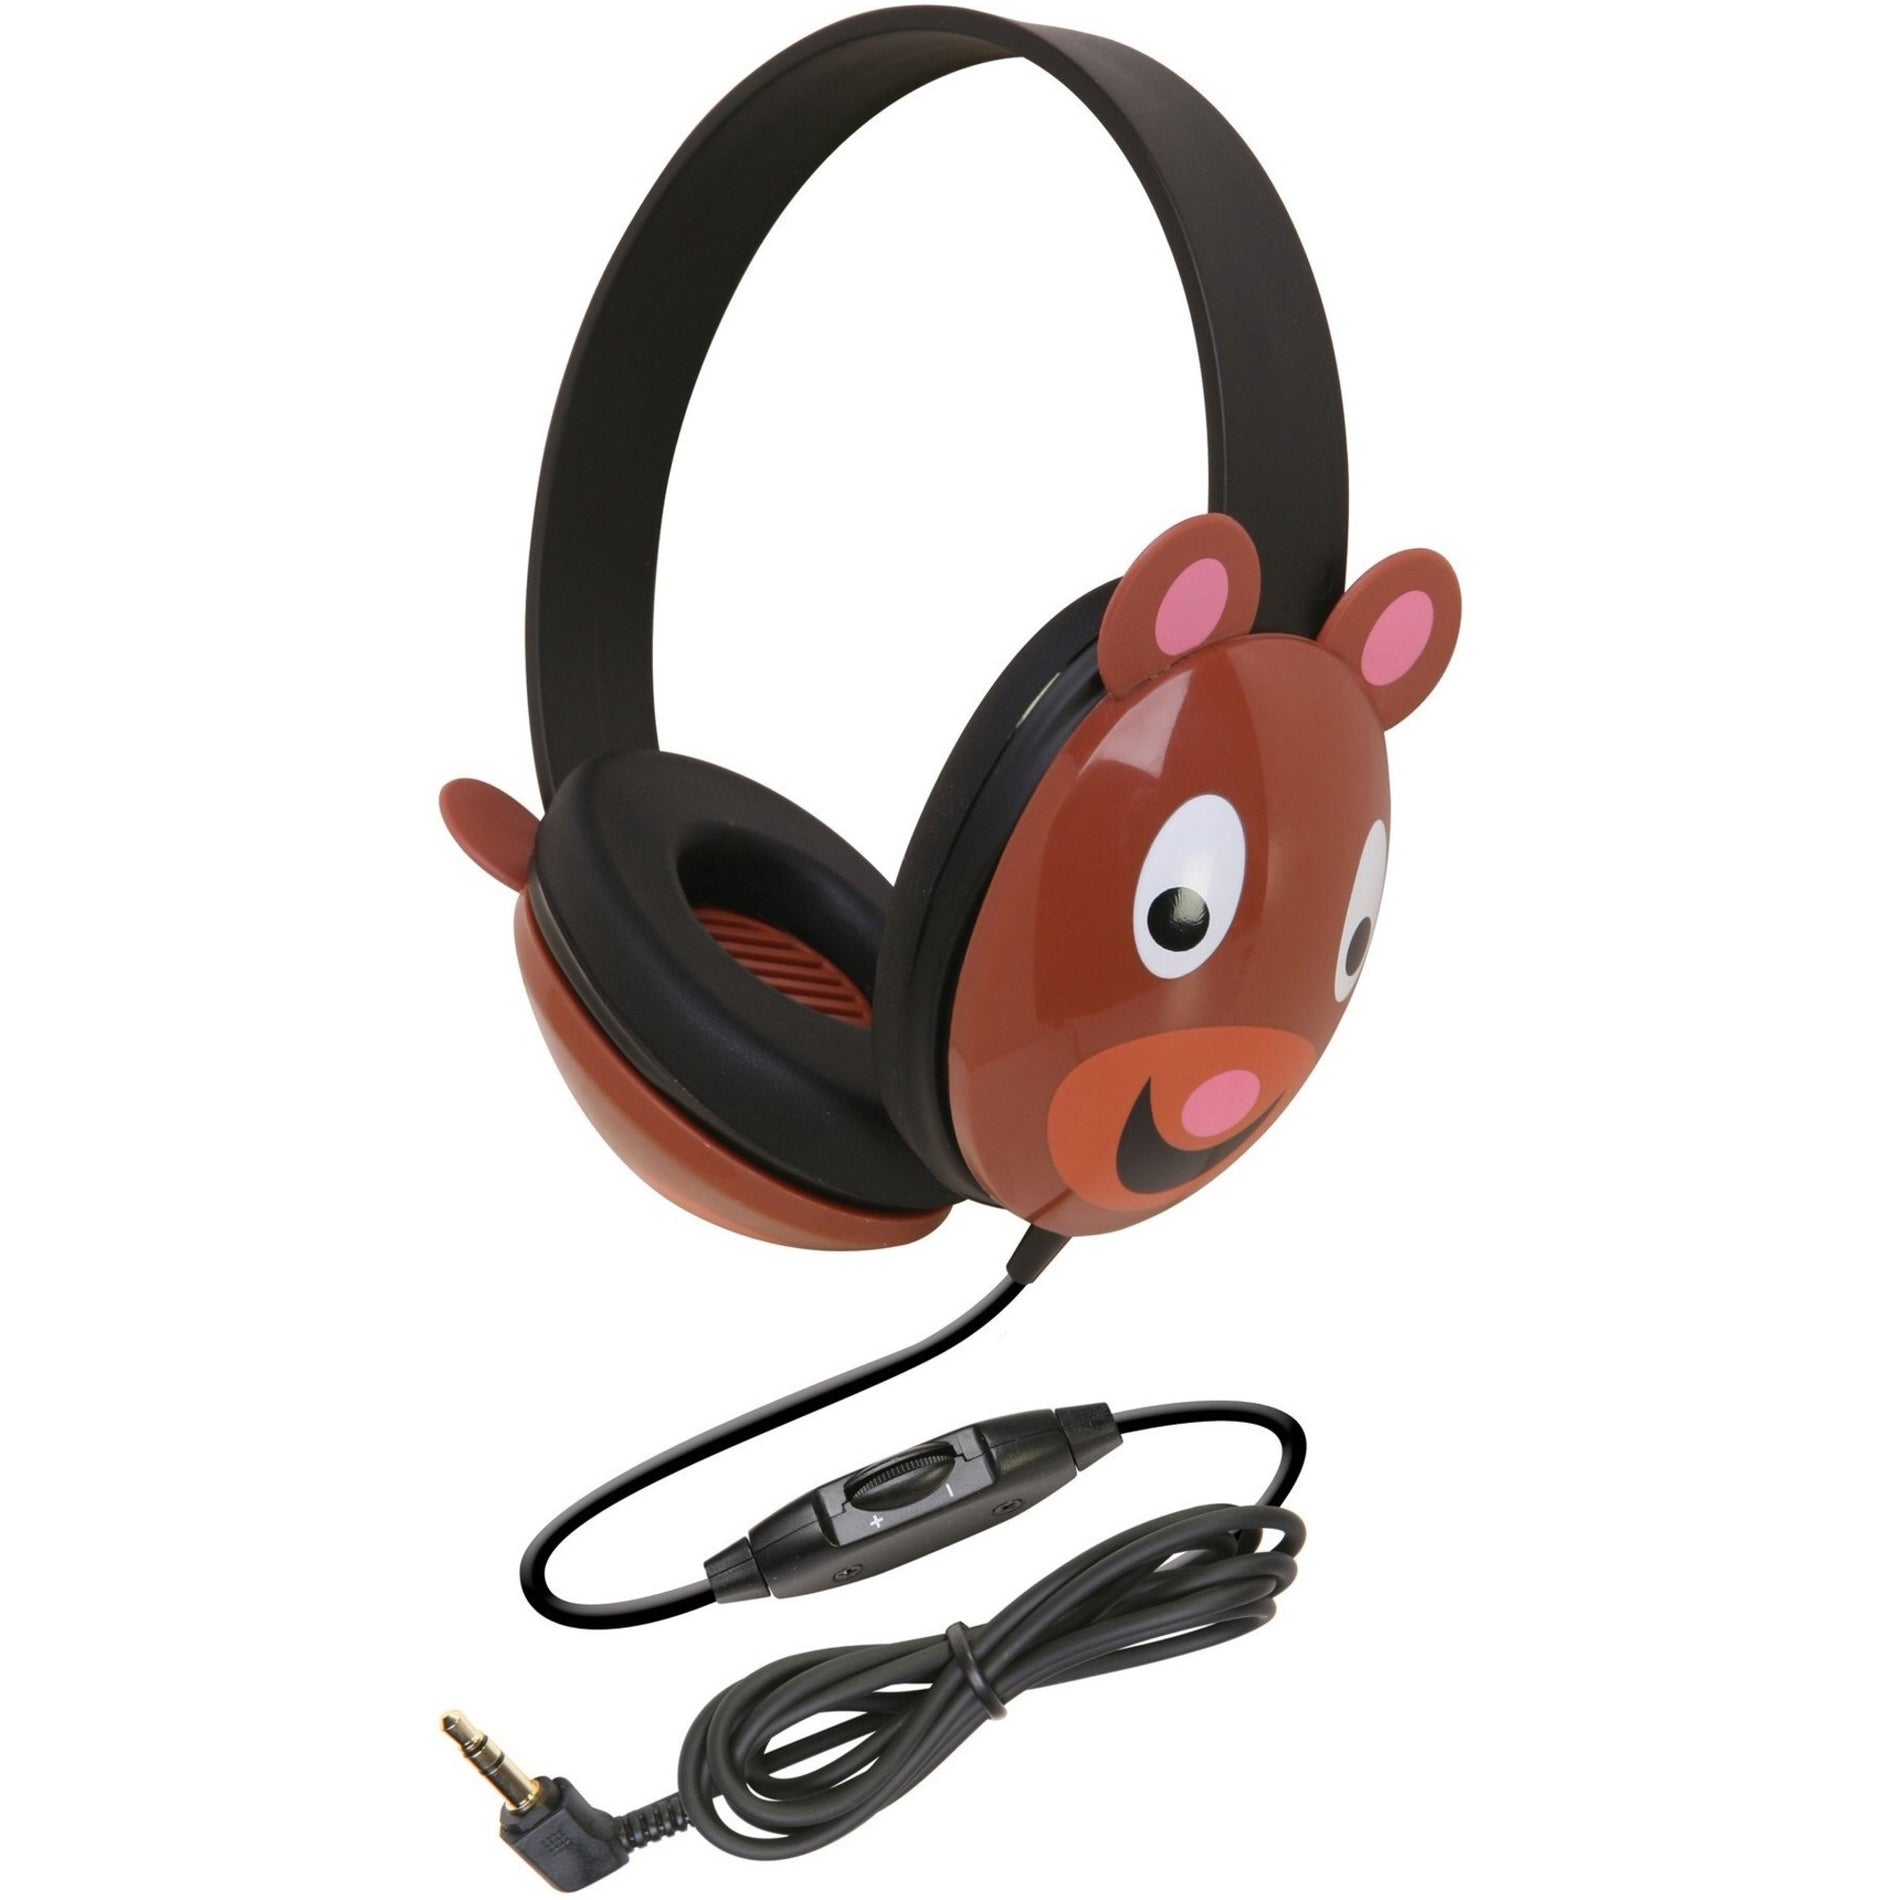 Califone 2810-be Stereo Wired 3.5mm Headphone Bear, Adjustable Headband, Noise Reduction, Volume Control